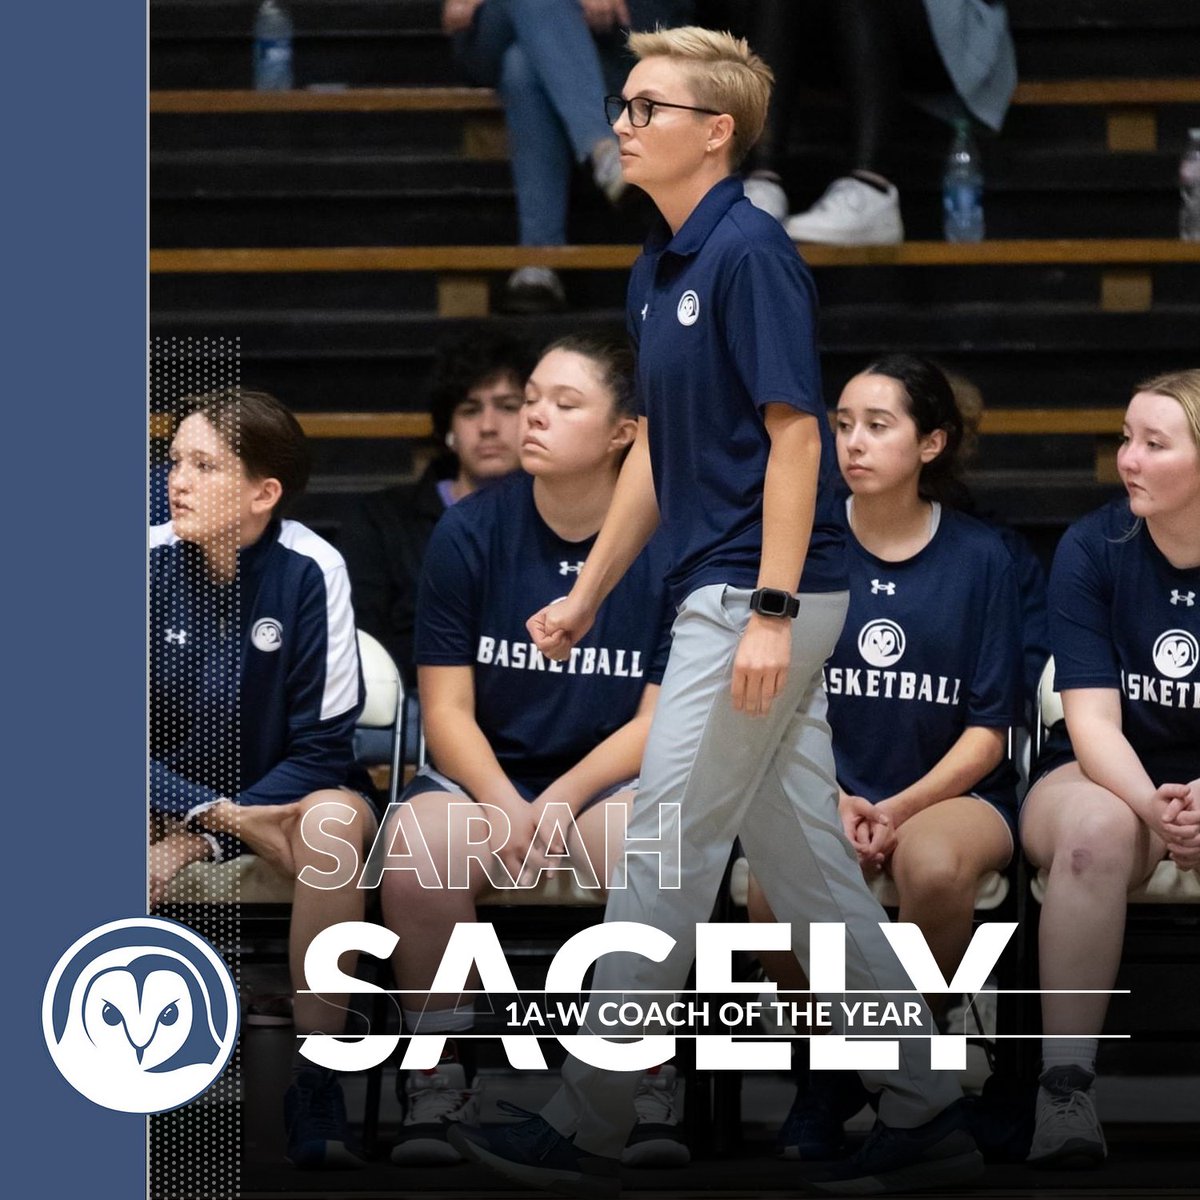 We are so excited to announce and celebrate Coach Sarah Sagely as she has been named the 1A-West Coach of the Year! 
#TogetherWeFly #GoStormers #ThadenHoops #CoachOfTheYear